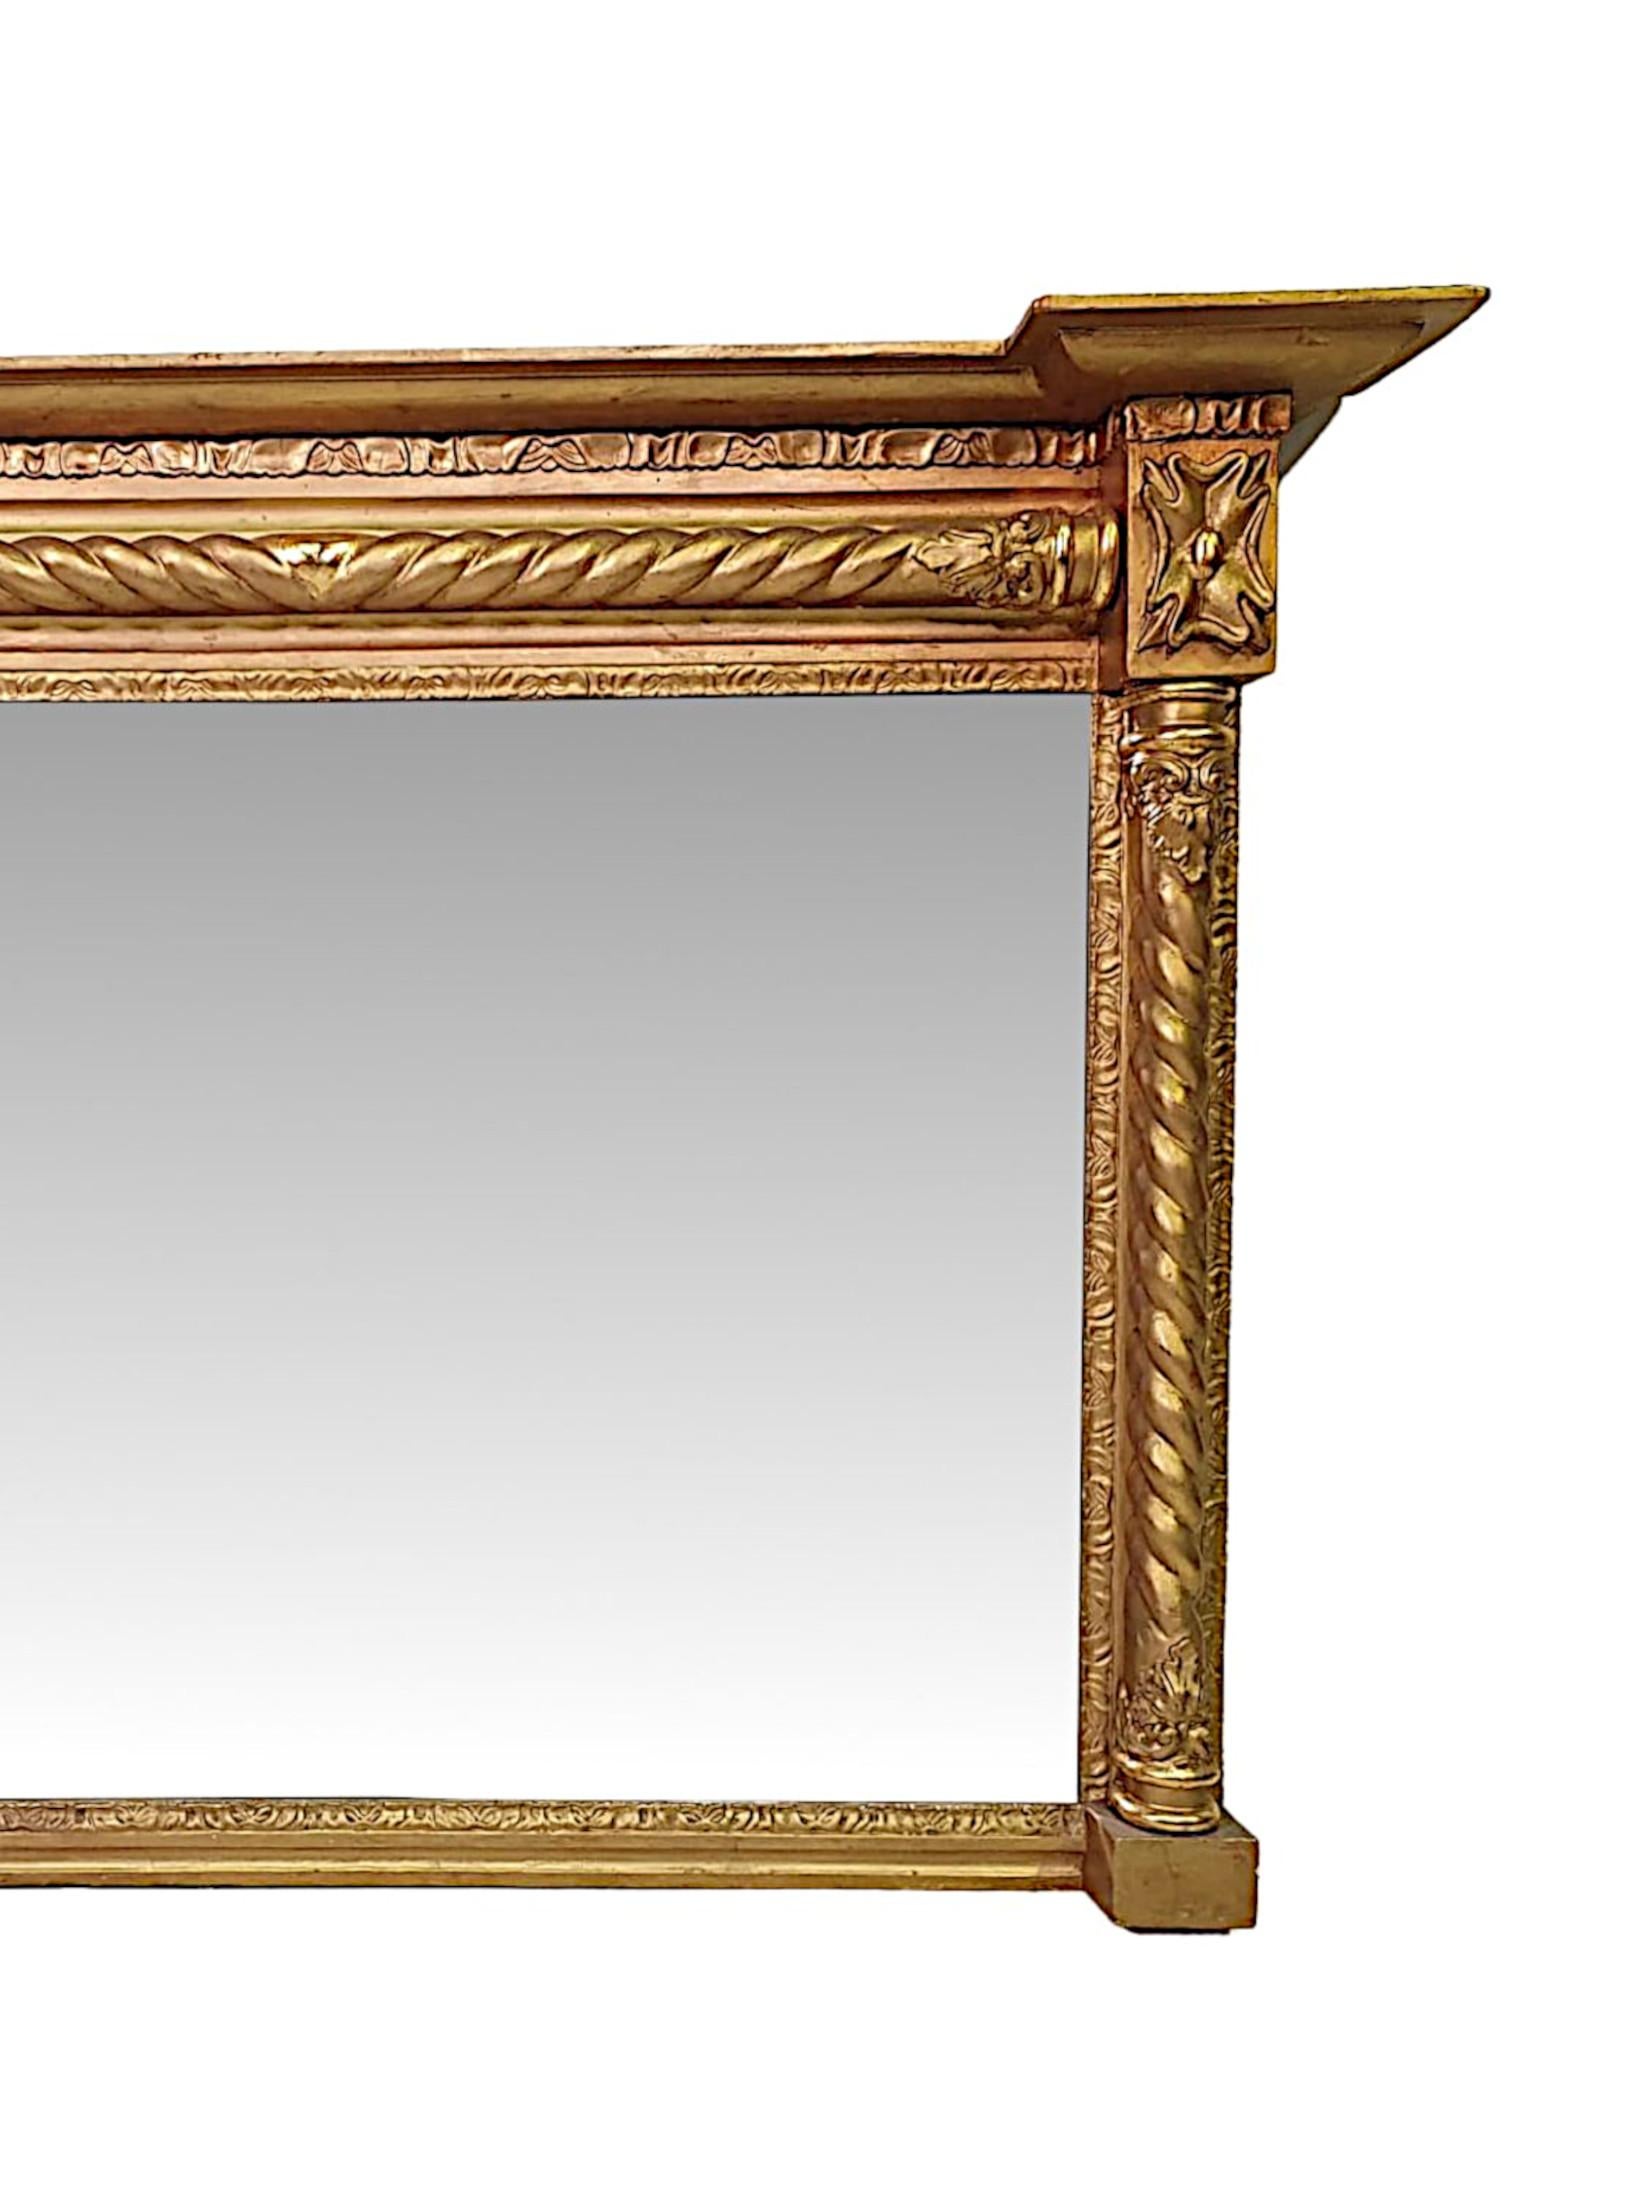 A fine 19th Century giltwood overmantle mirror of rectangular form. The bevelled mirror glass plate is set within a beautifully hand carved giltwood frame, surmounted with an overhanging broken pediment stepped cornice, raised over a spiral twist